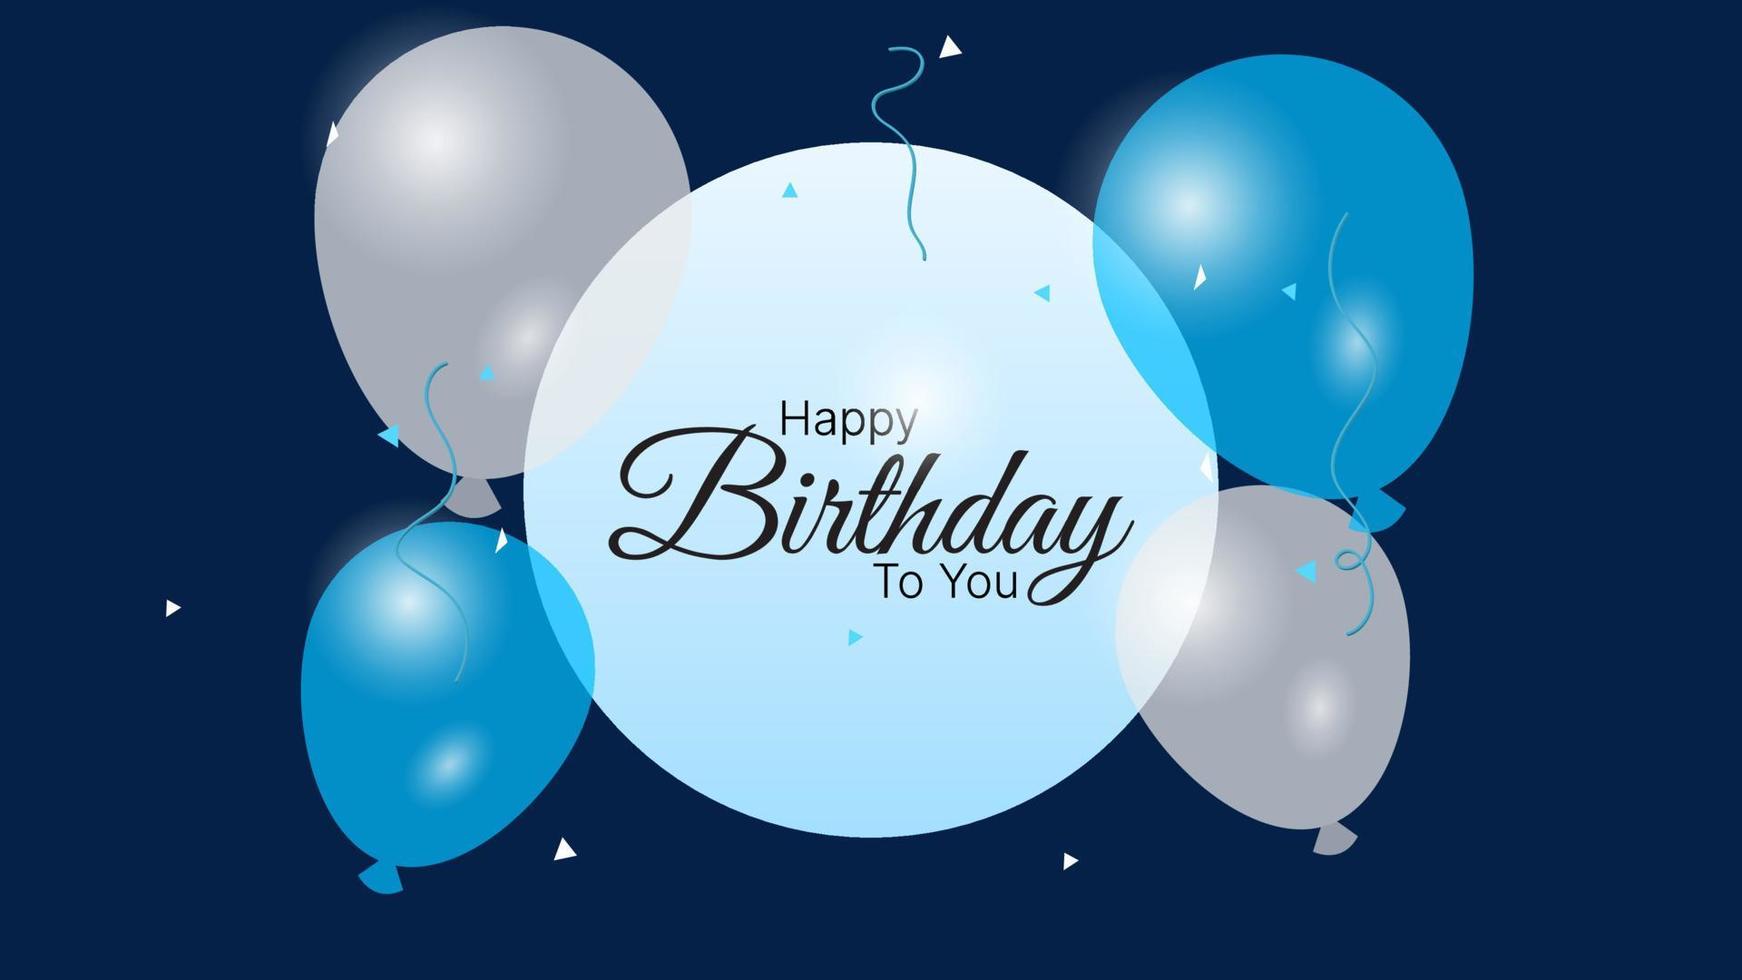 Happy birthday background with balloons, confetti and circular shape in in blue and white color. suitable for greeting card, poster, social media post, etc. vector illustration